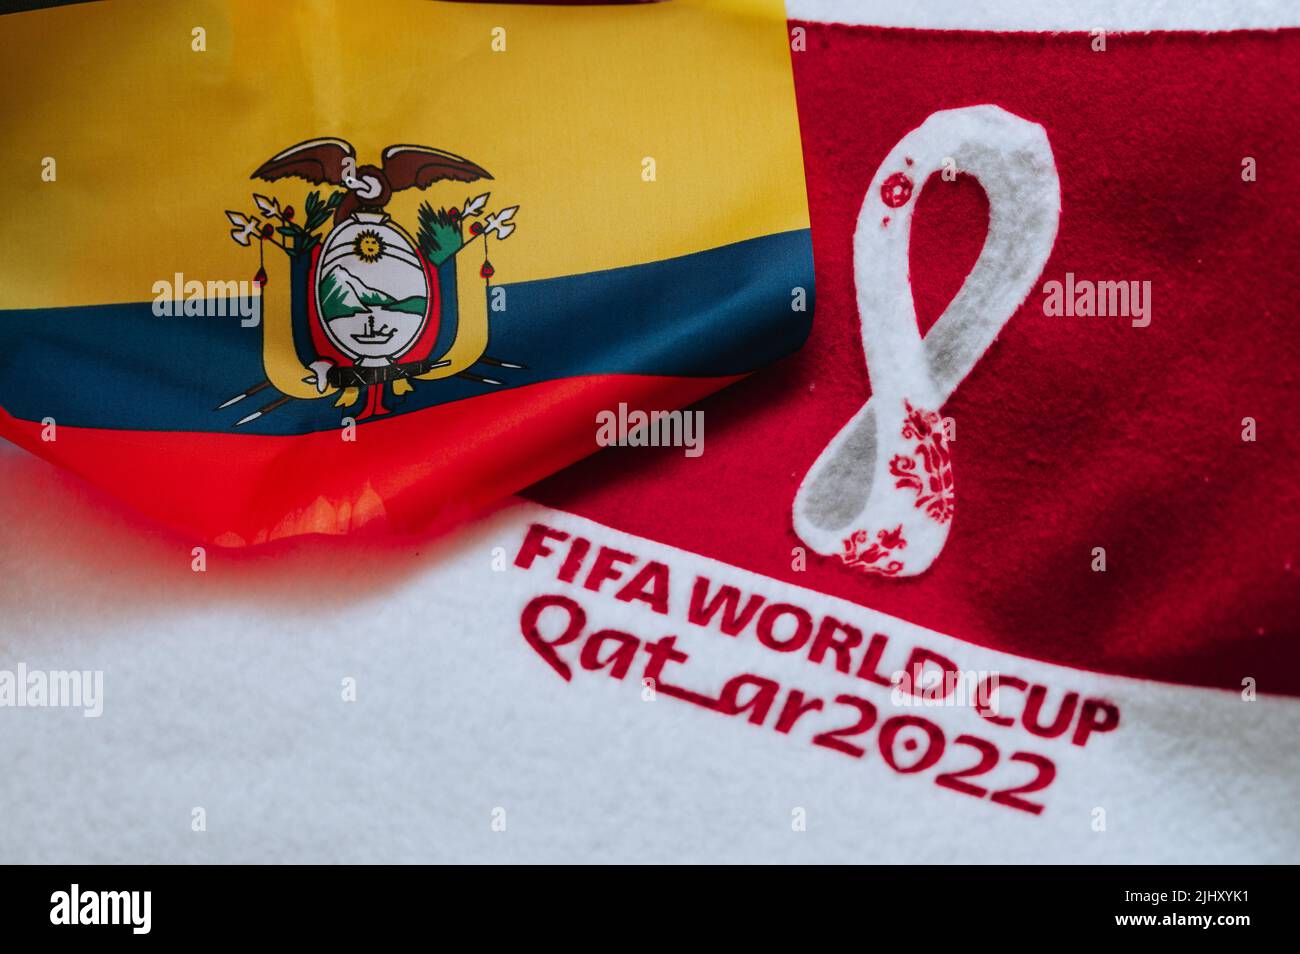 QATAR, DOHA, 18 JULY, 2022: Ecuador National flag and logo of FIFA World Cup in Qatar 2022 on red carpet. Soccer sport background, edit space. Qatar 2 Stock Photo